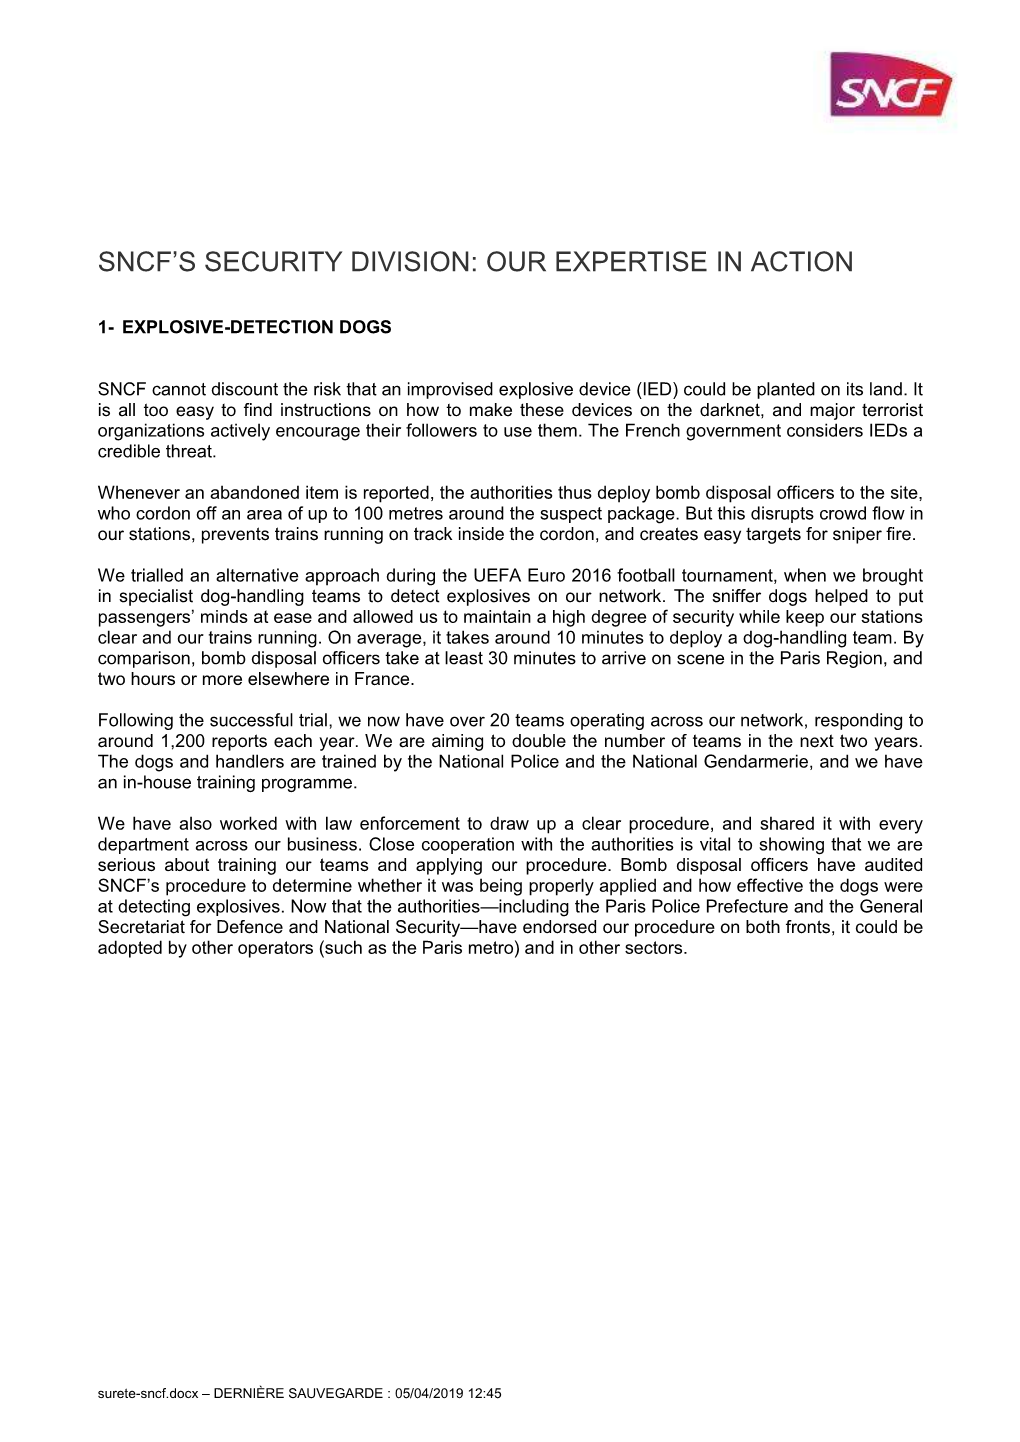 Sncf's Security Division: Our Expertise in Action